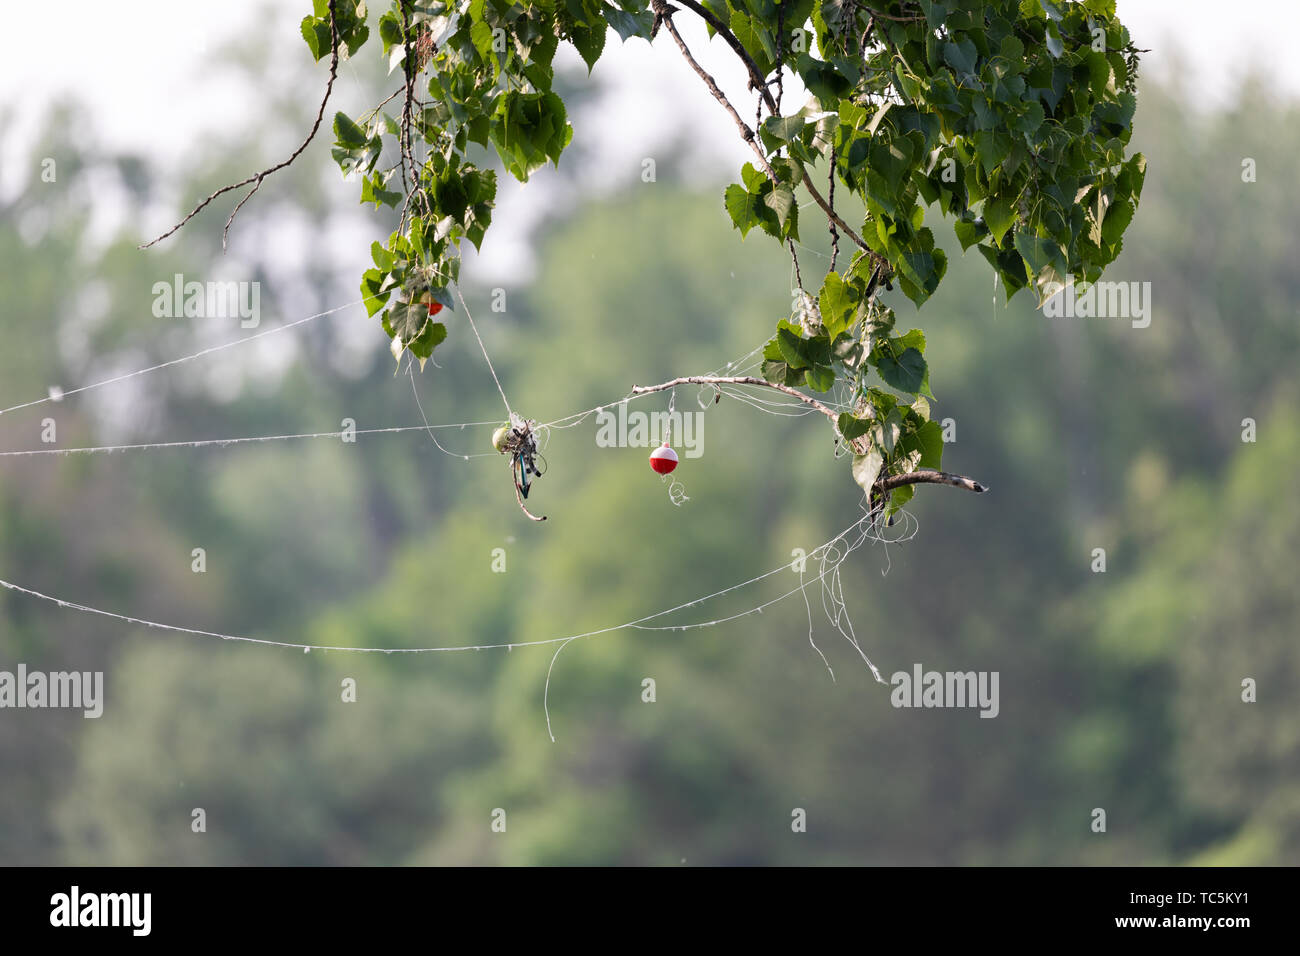 Fishing gear snagged in tree Stock Photo - Alamy